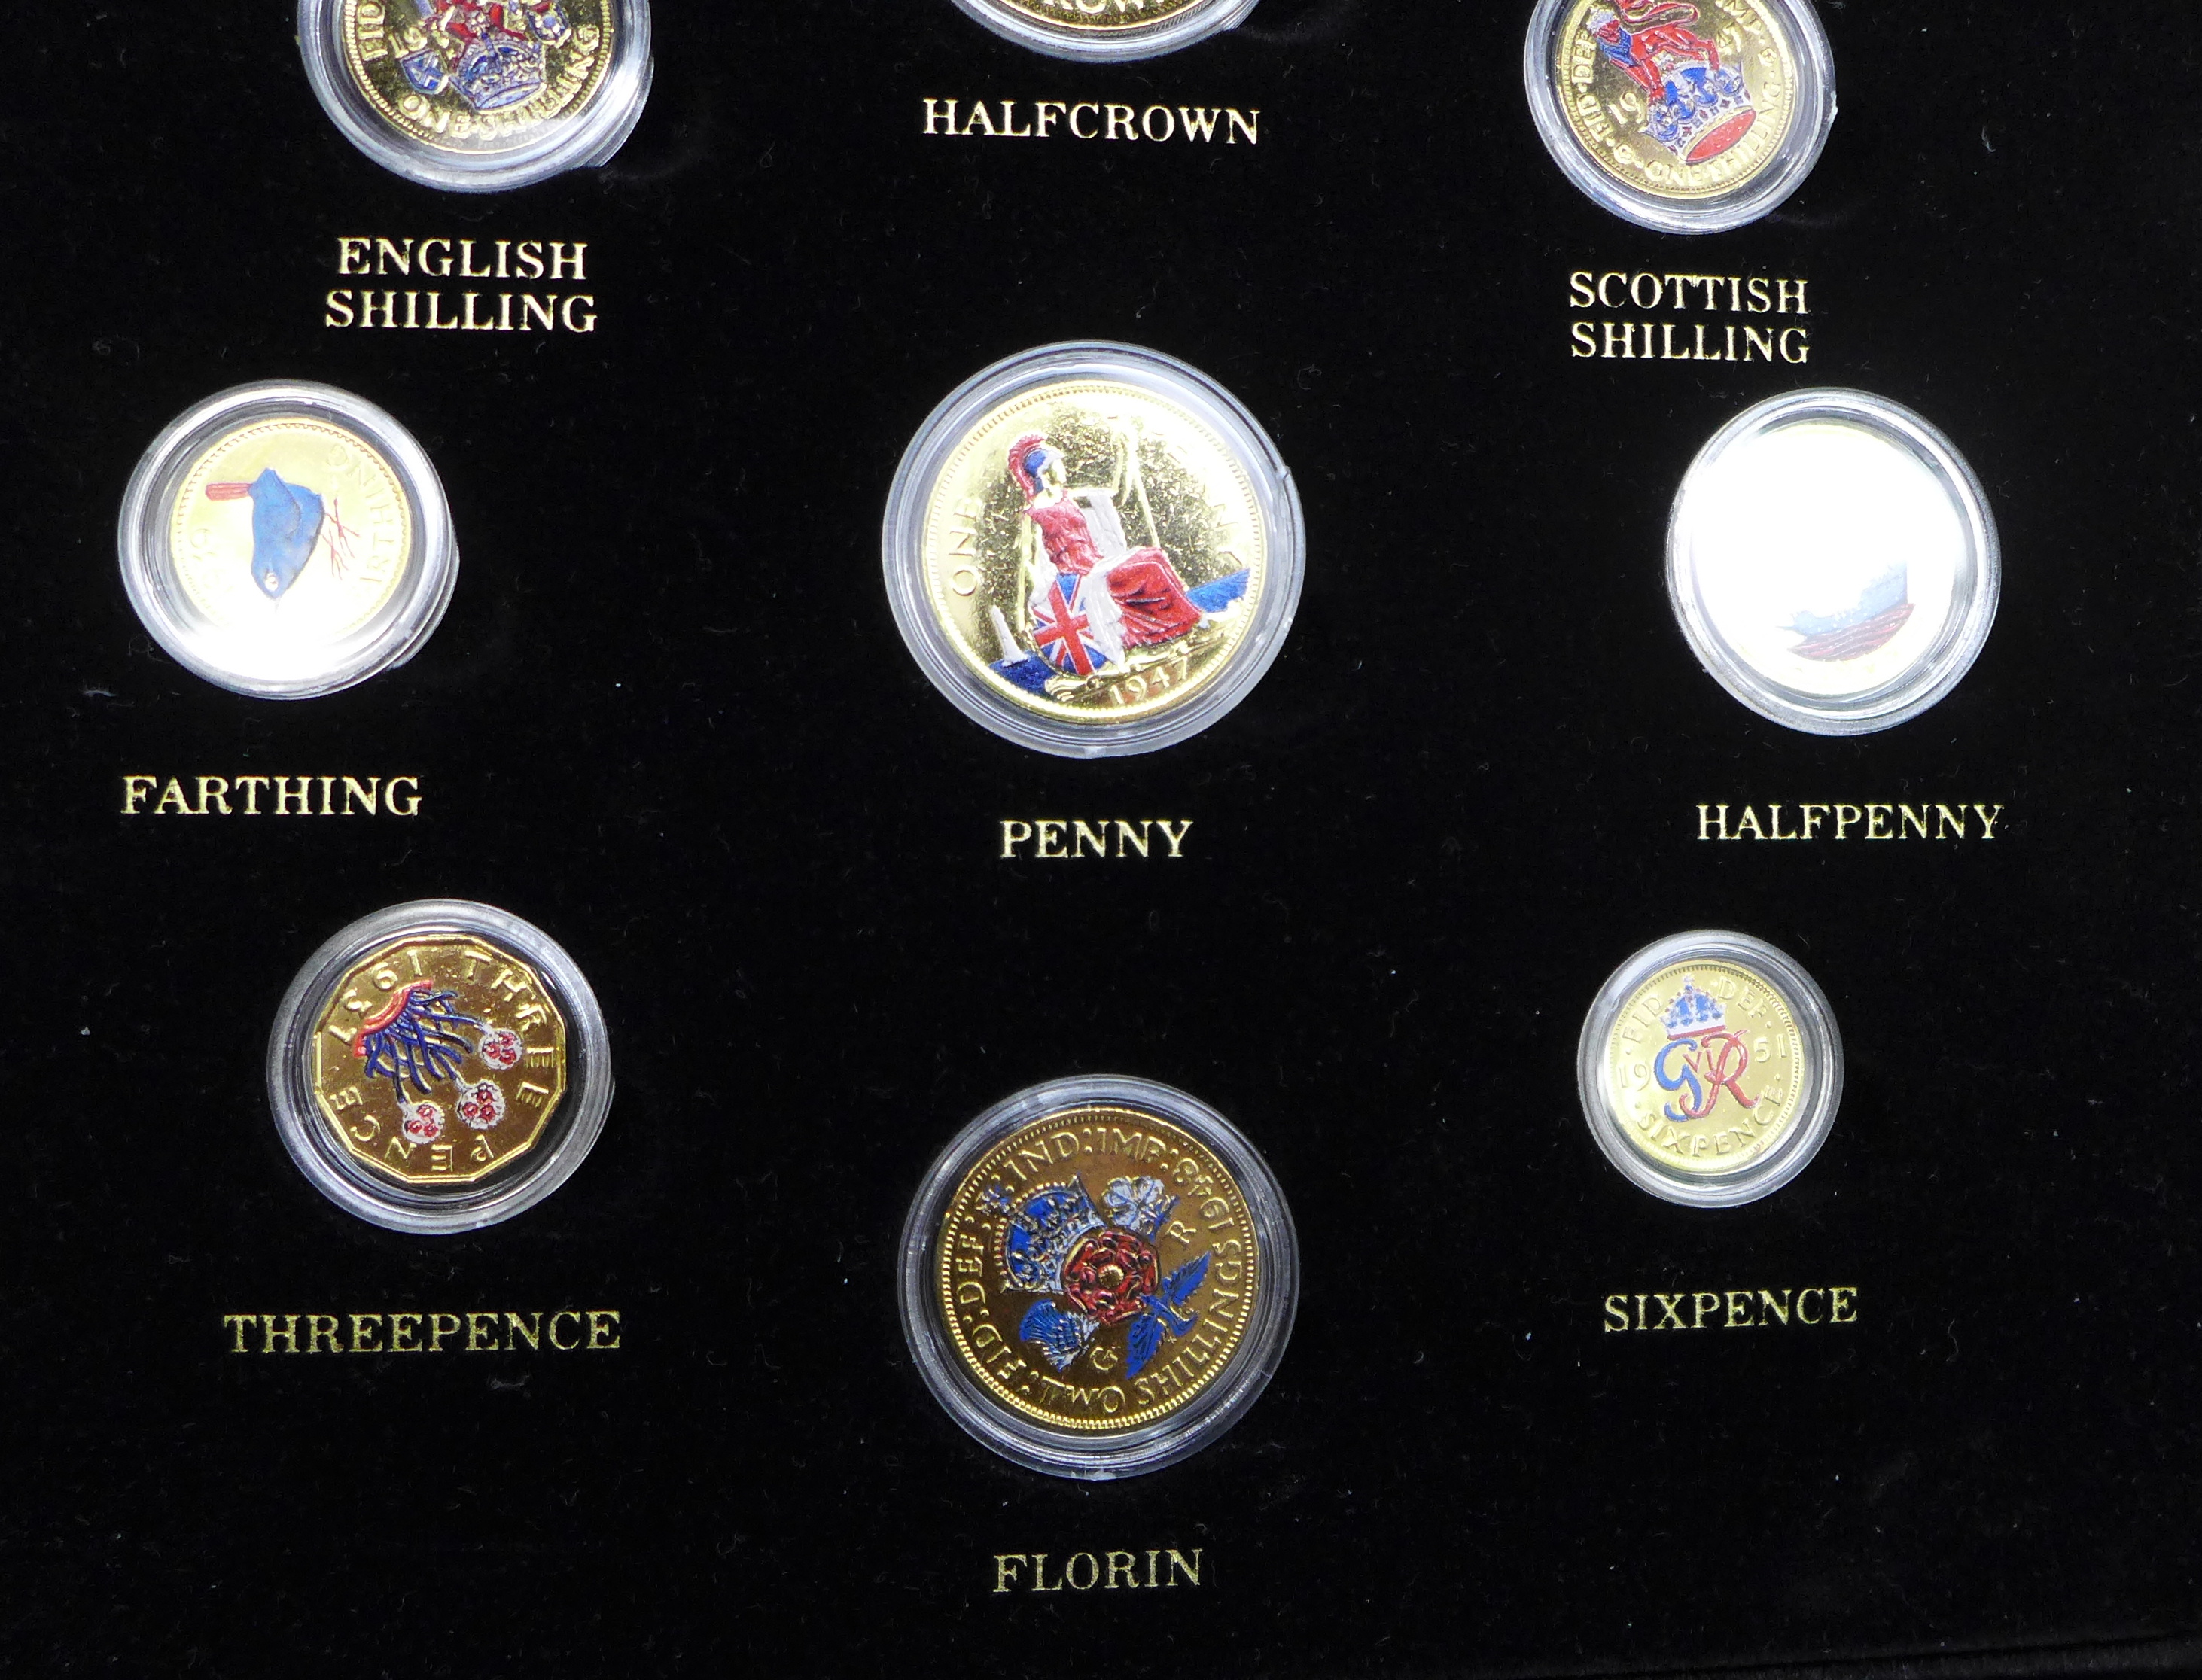 The changing face of British coinage, a set of The Emblem series decimals of Elizabeth II and a - Bild 3 aus 7